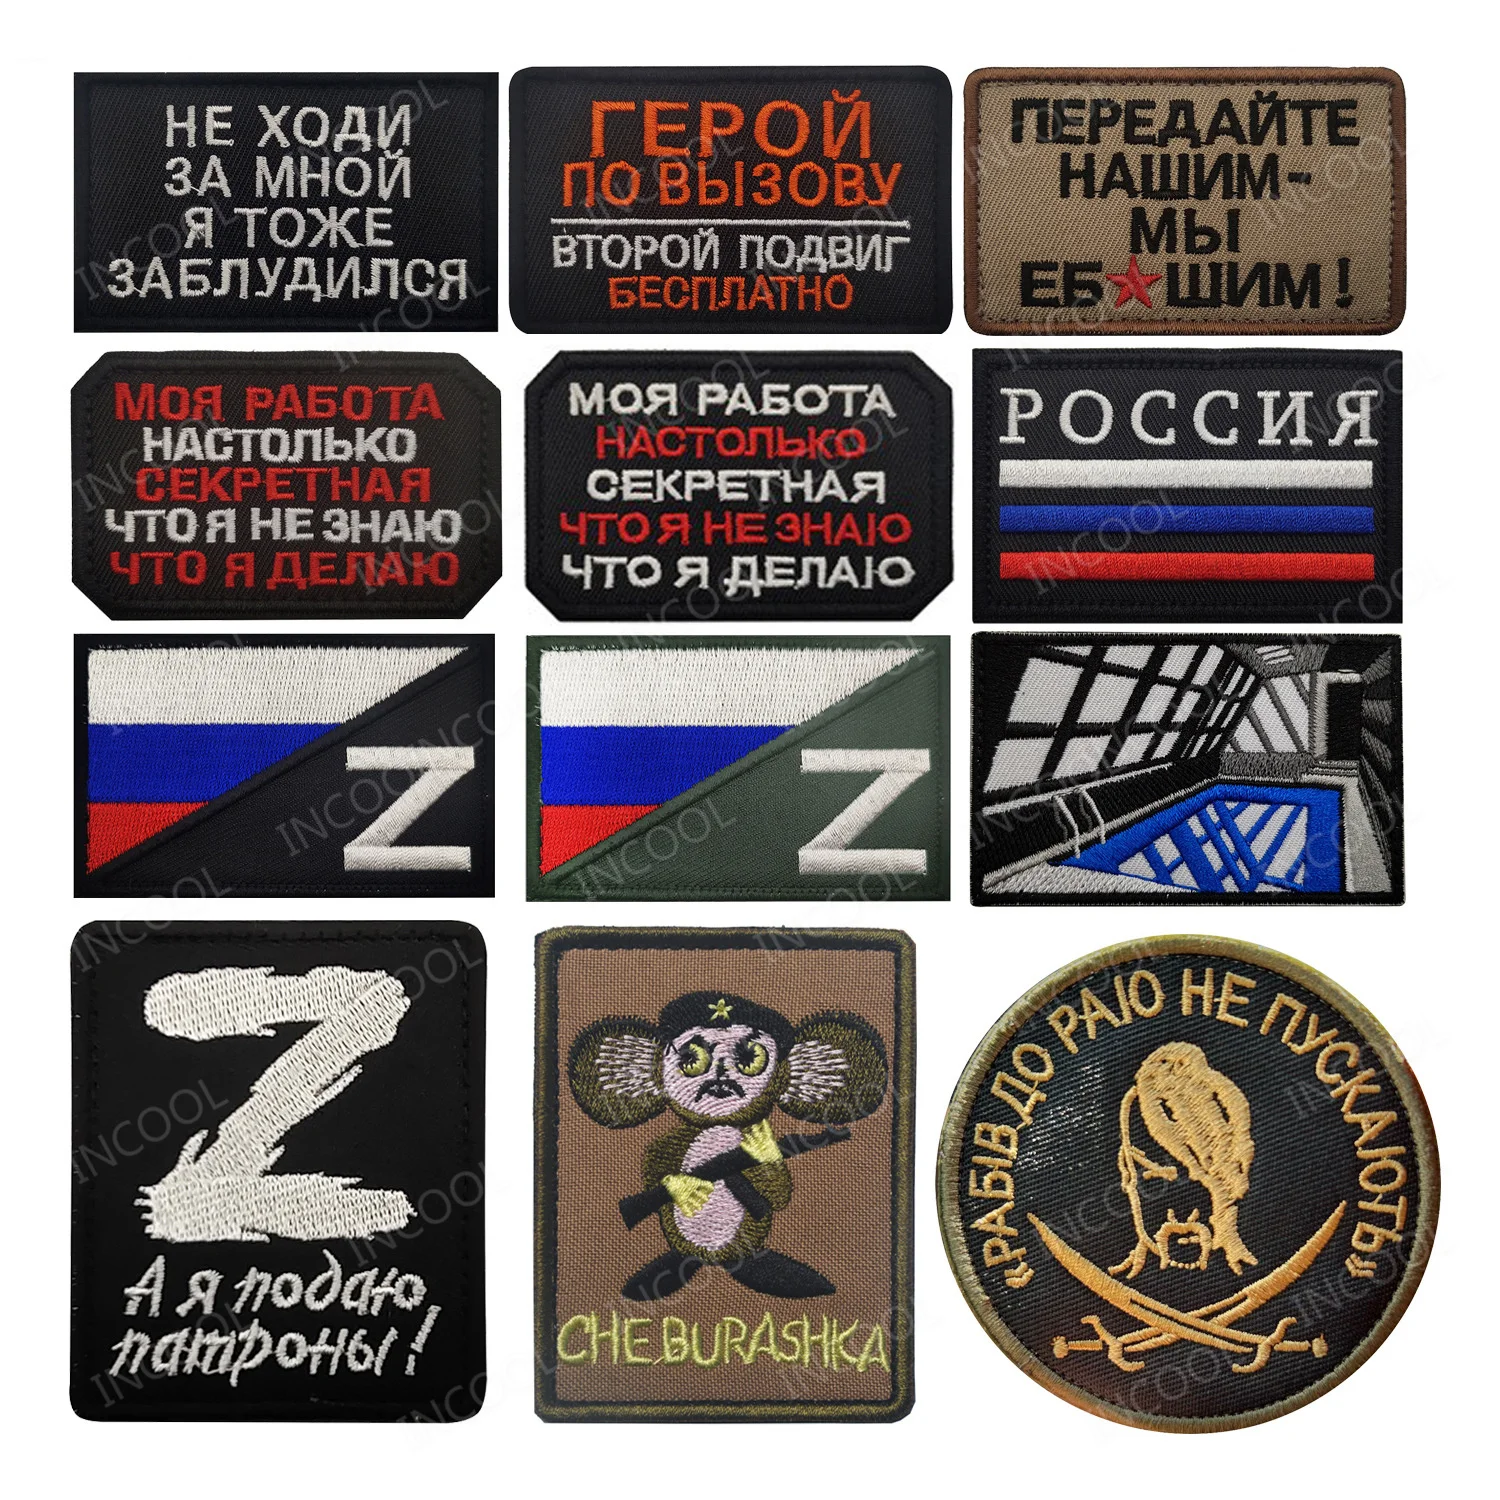 

Russia Soldier Tactical Military Patches Motivational Phrases Biker Slogan Russian Flags Embroidered Badges Appliqued Emblem